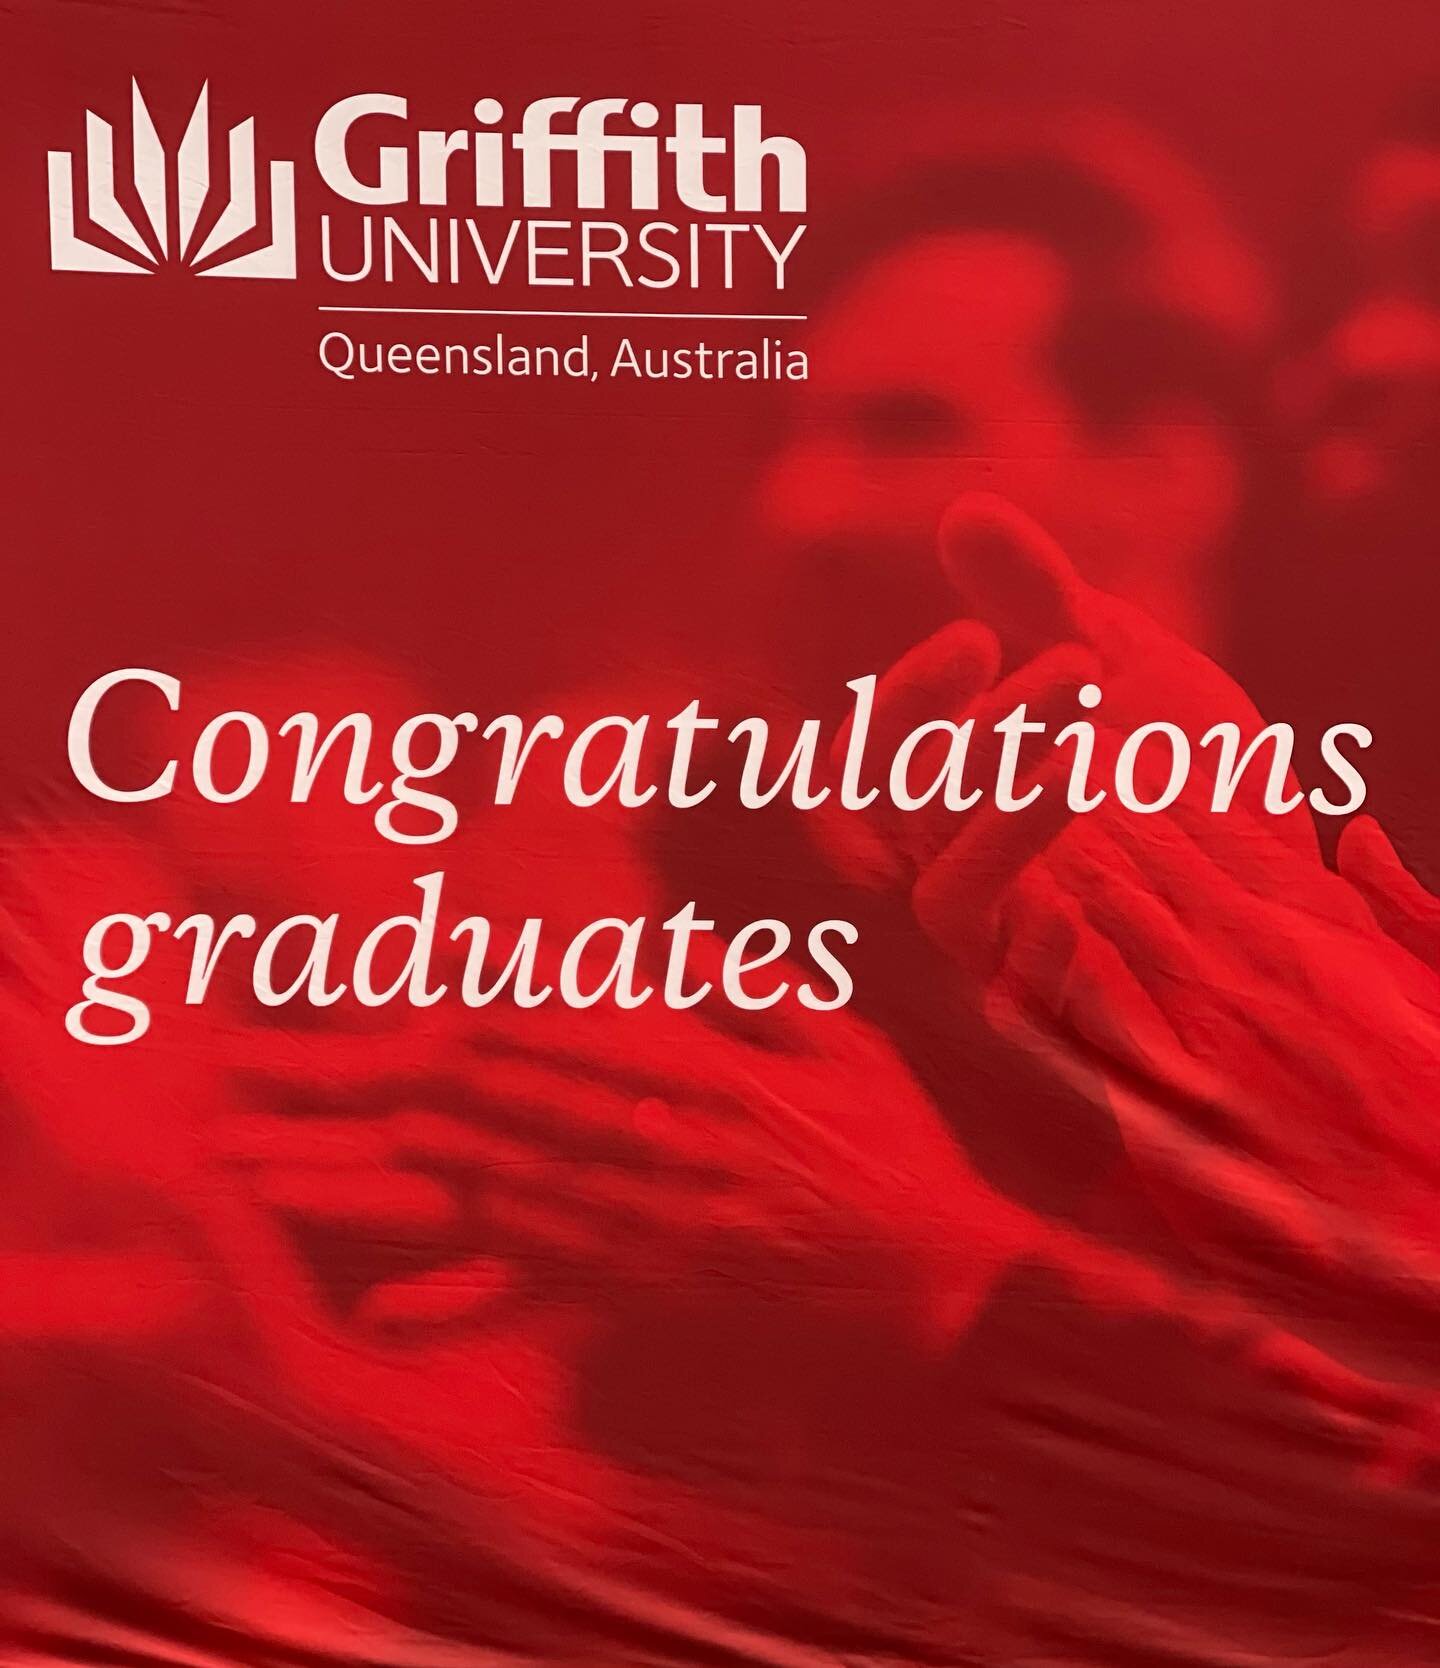 Congratulations to all our @griffithuniversity graduating residents!! 🎉🎉